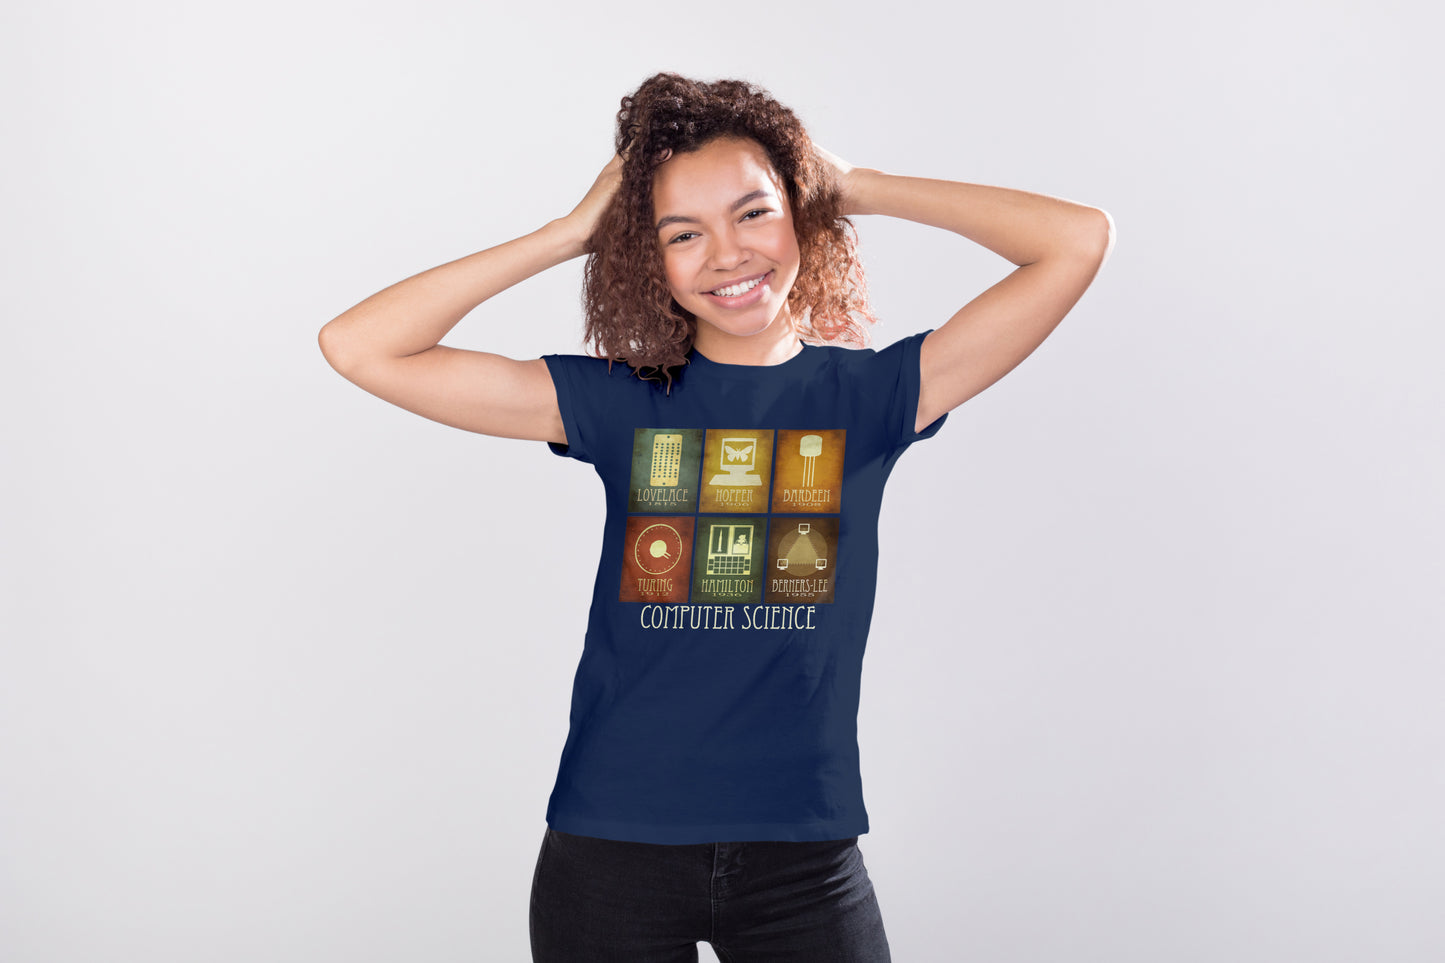 Computer Science T-shirt, 6 Programmers and Scientists in History